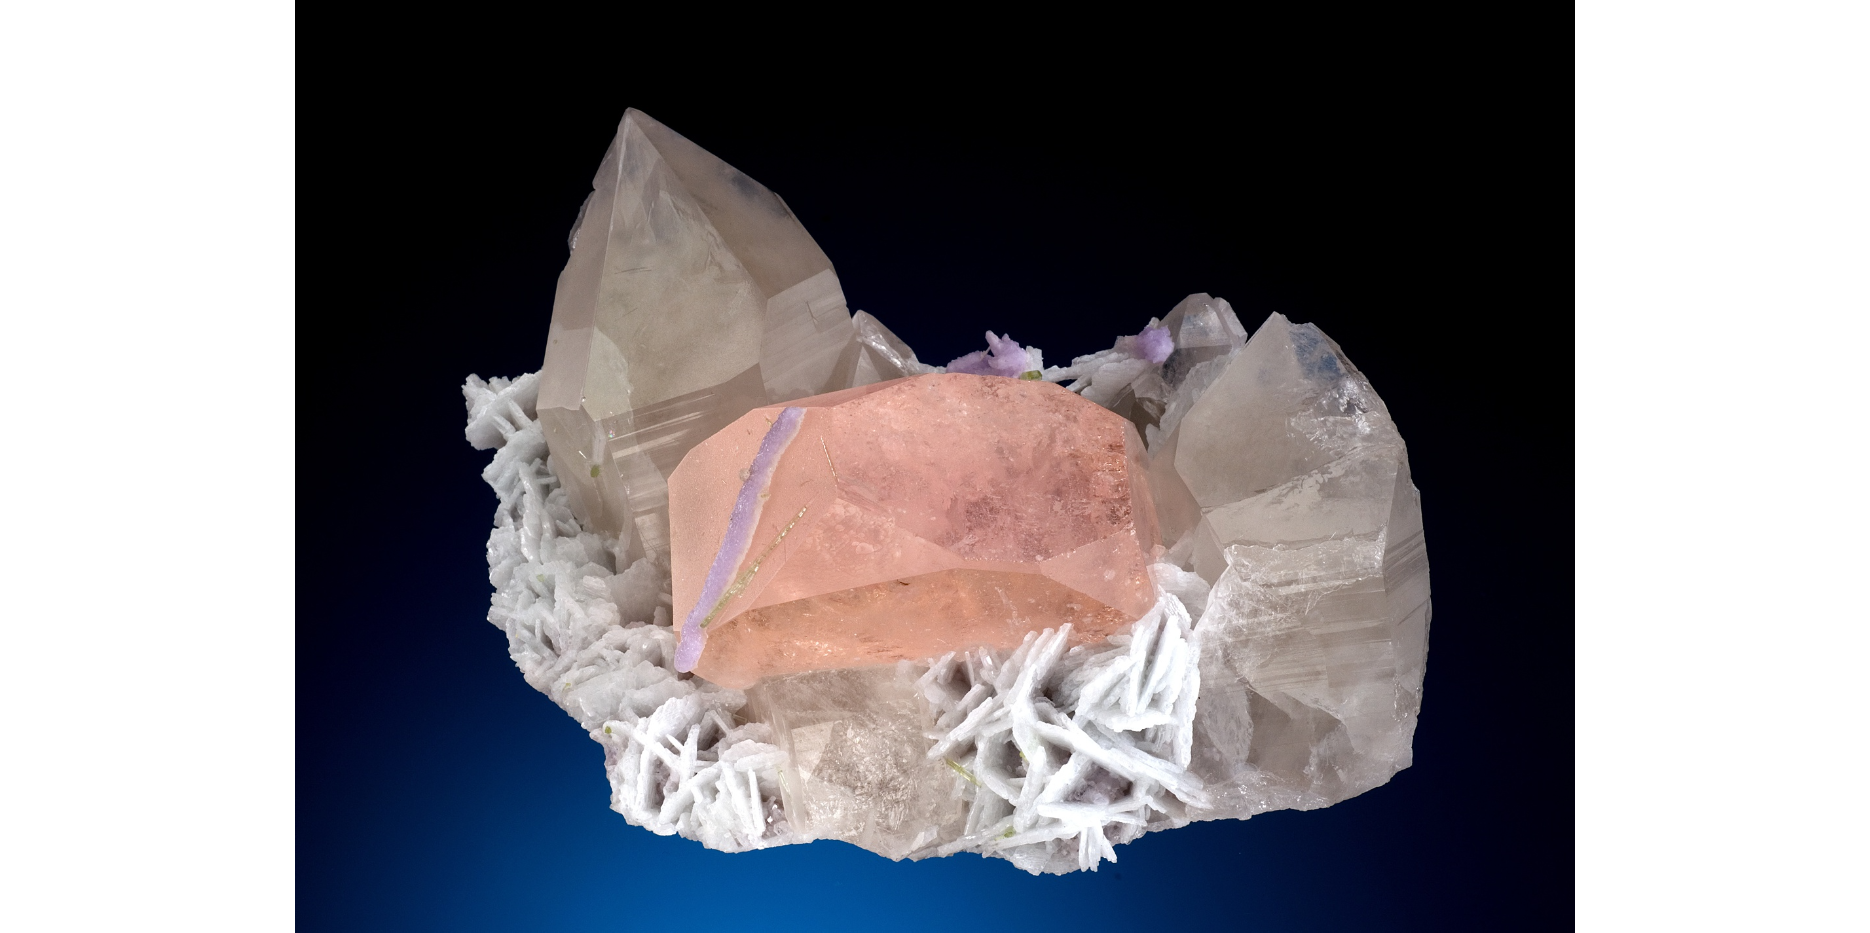 Morganite | Properties, Formation, Occurrence » Geology Science